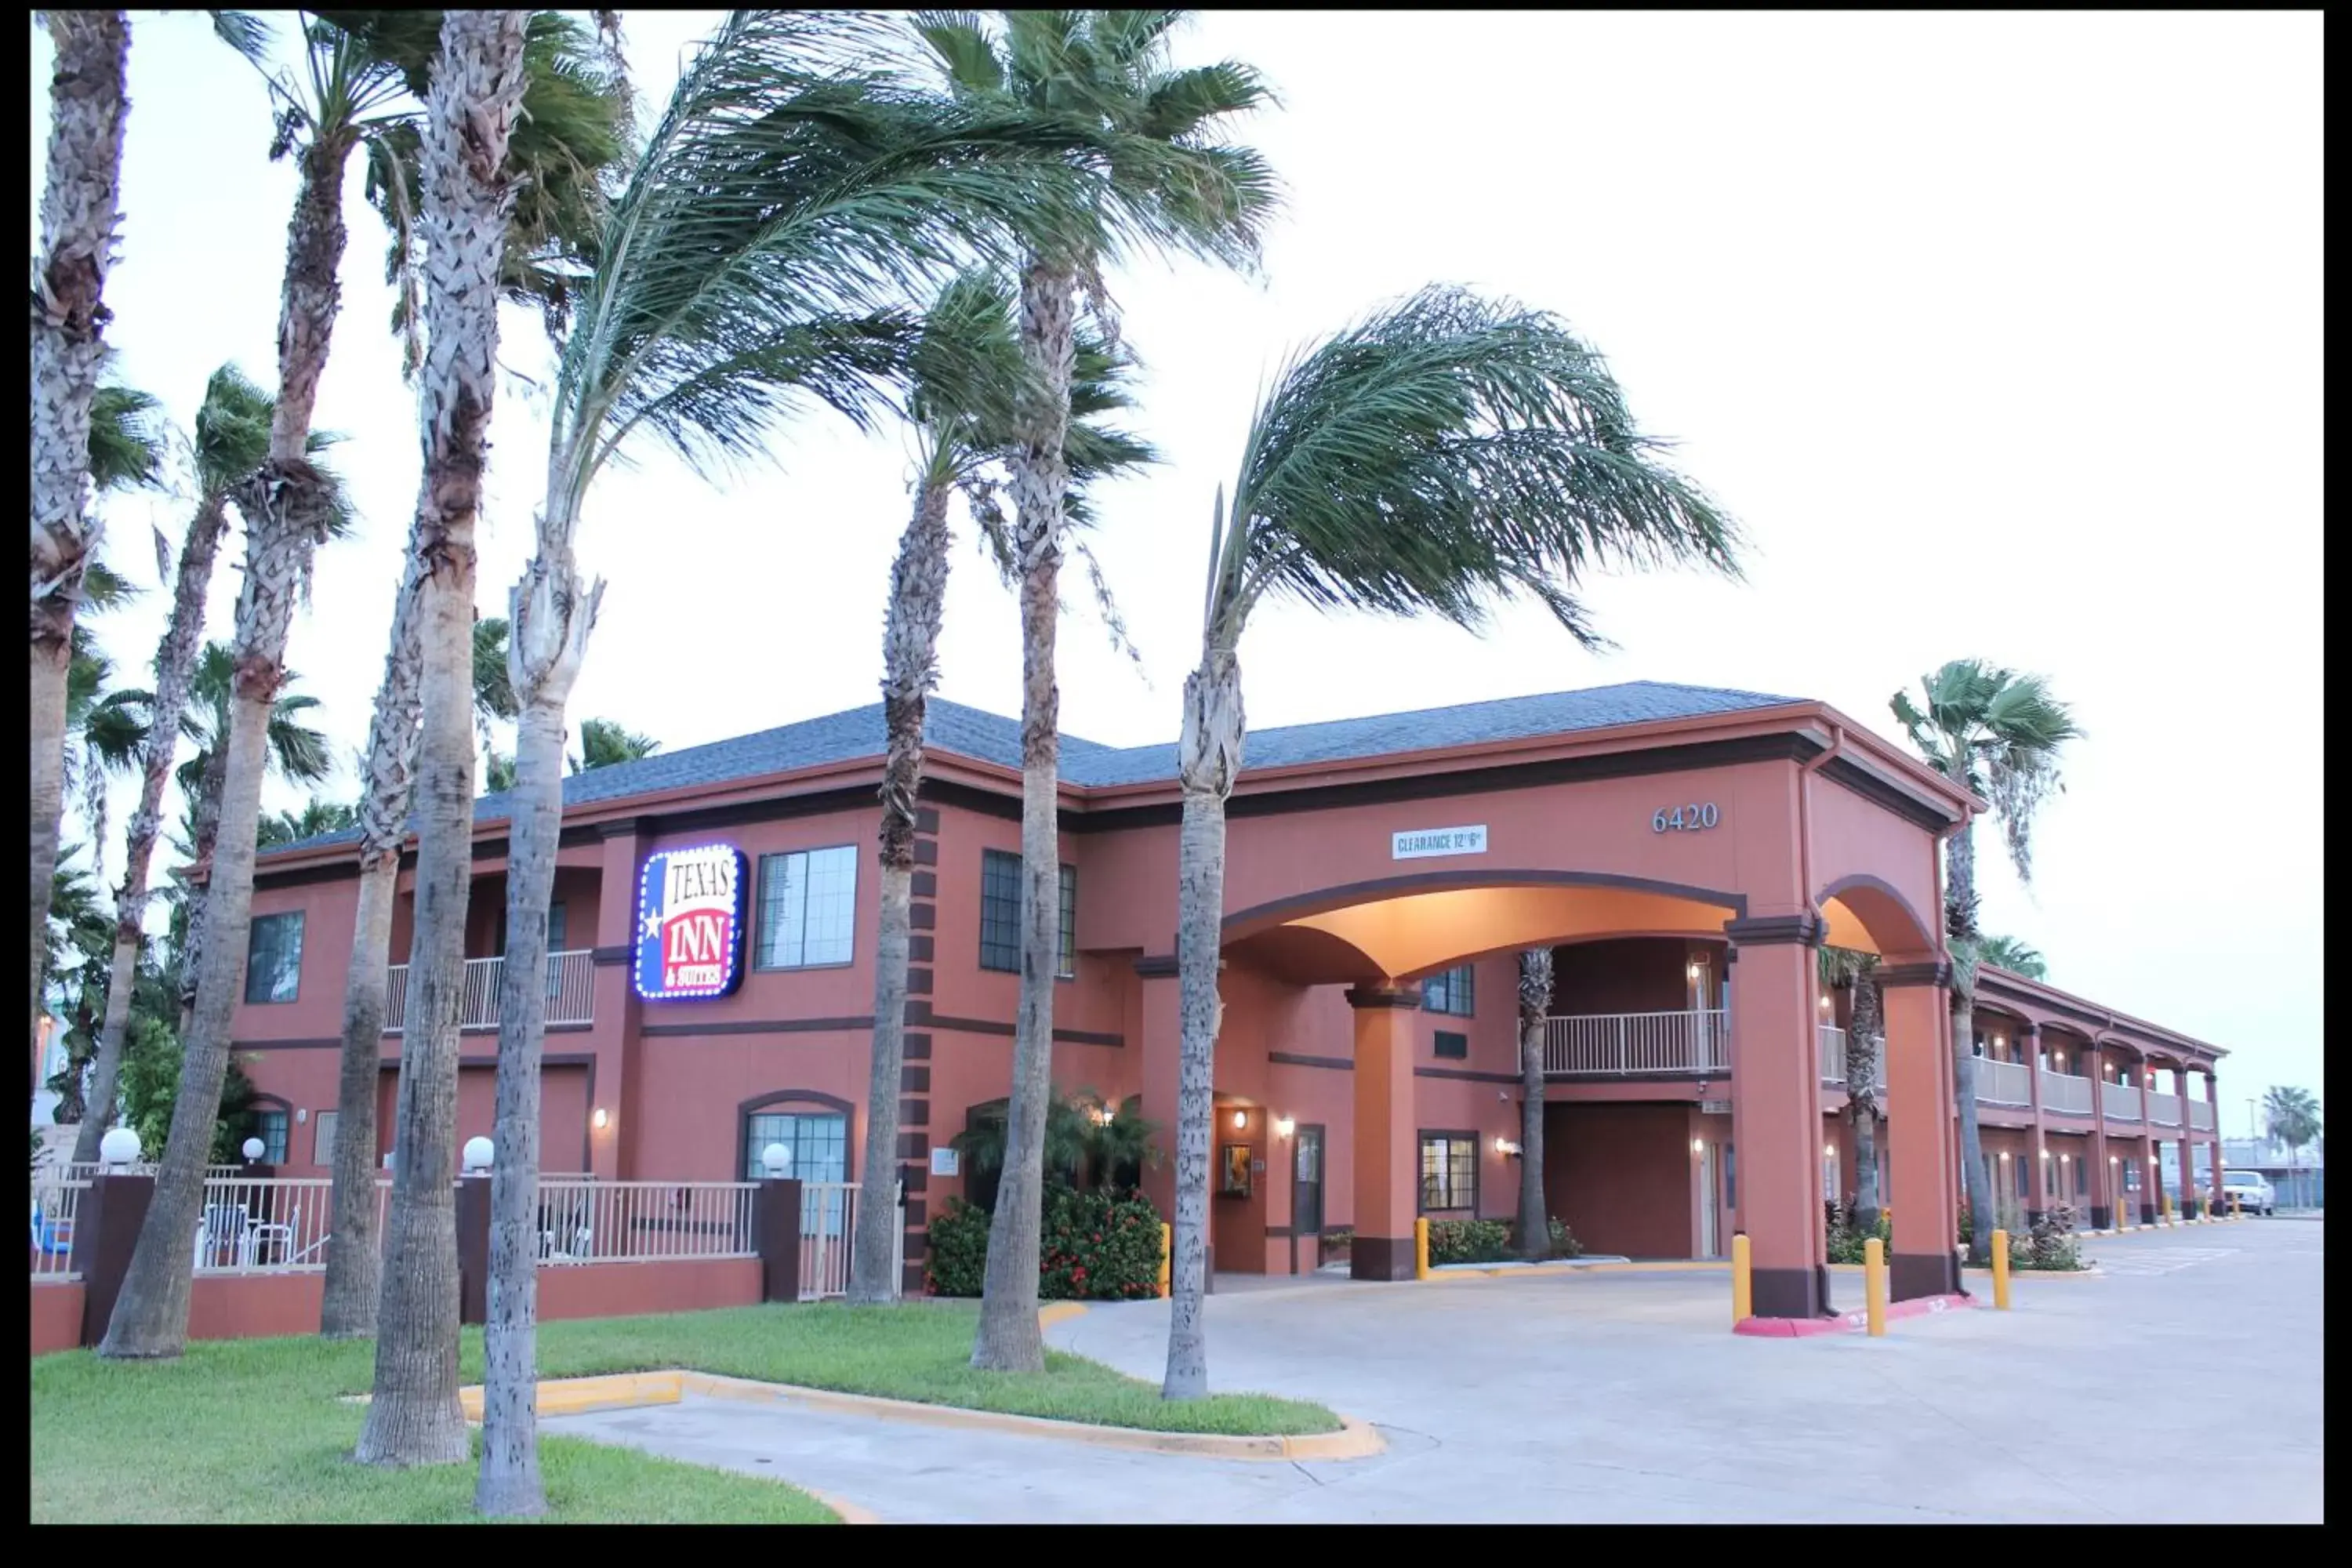 Facade/Entrance in Texas Inn & Suites McAllen at La Plaza Mall and Airport